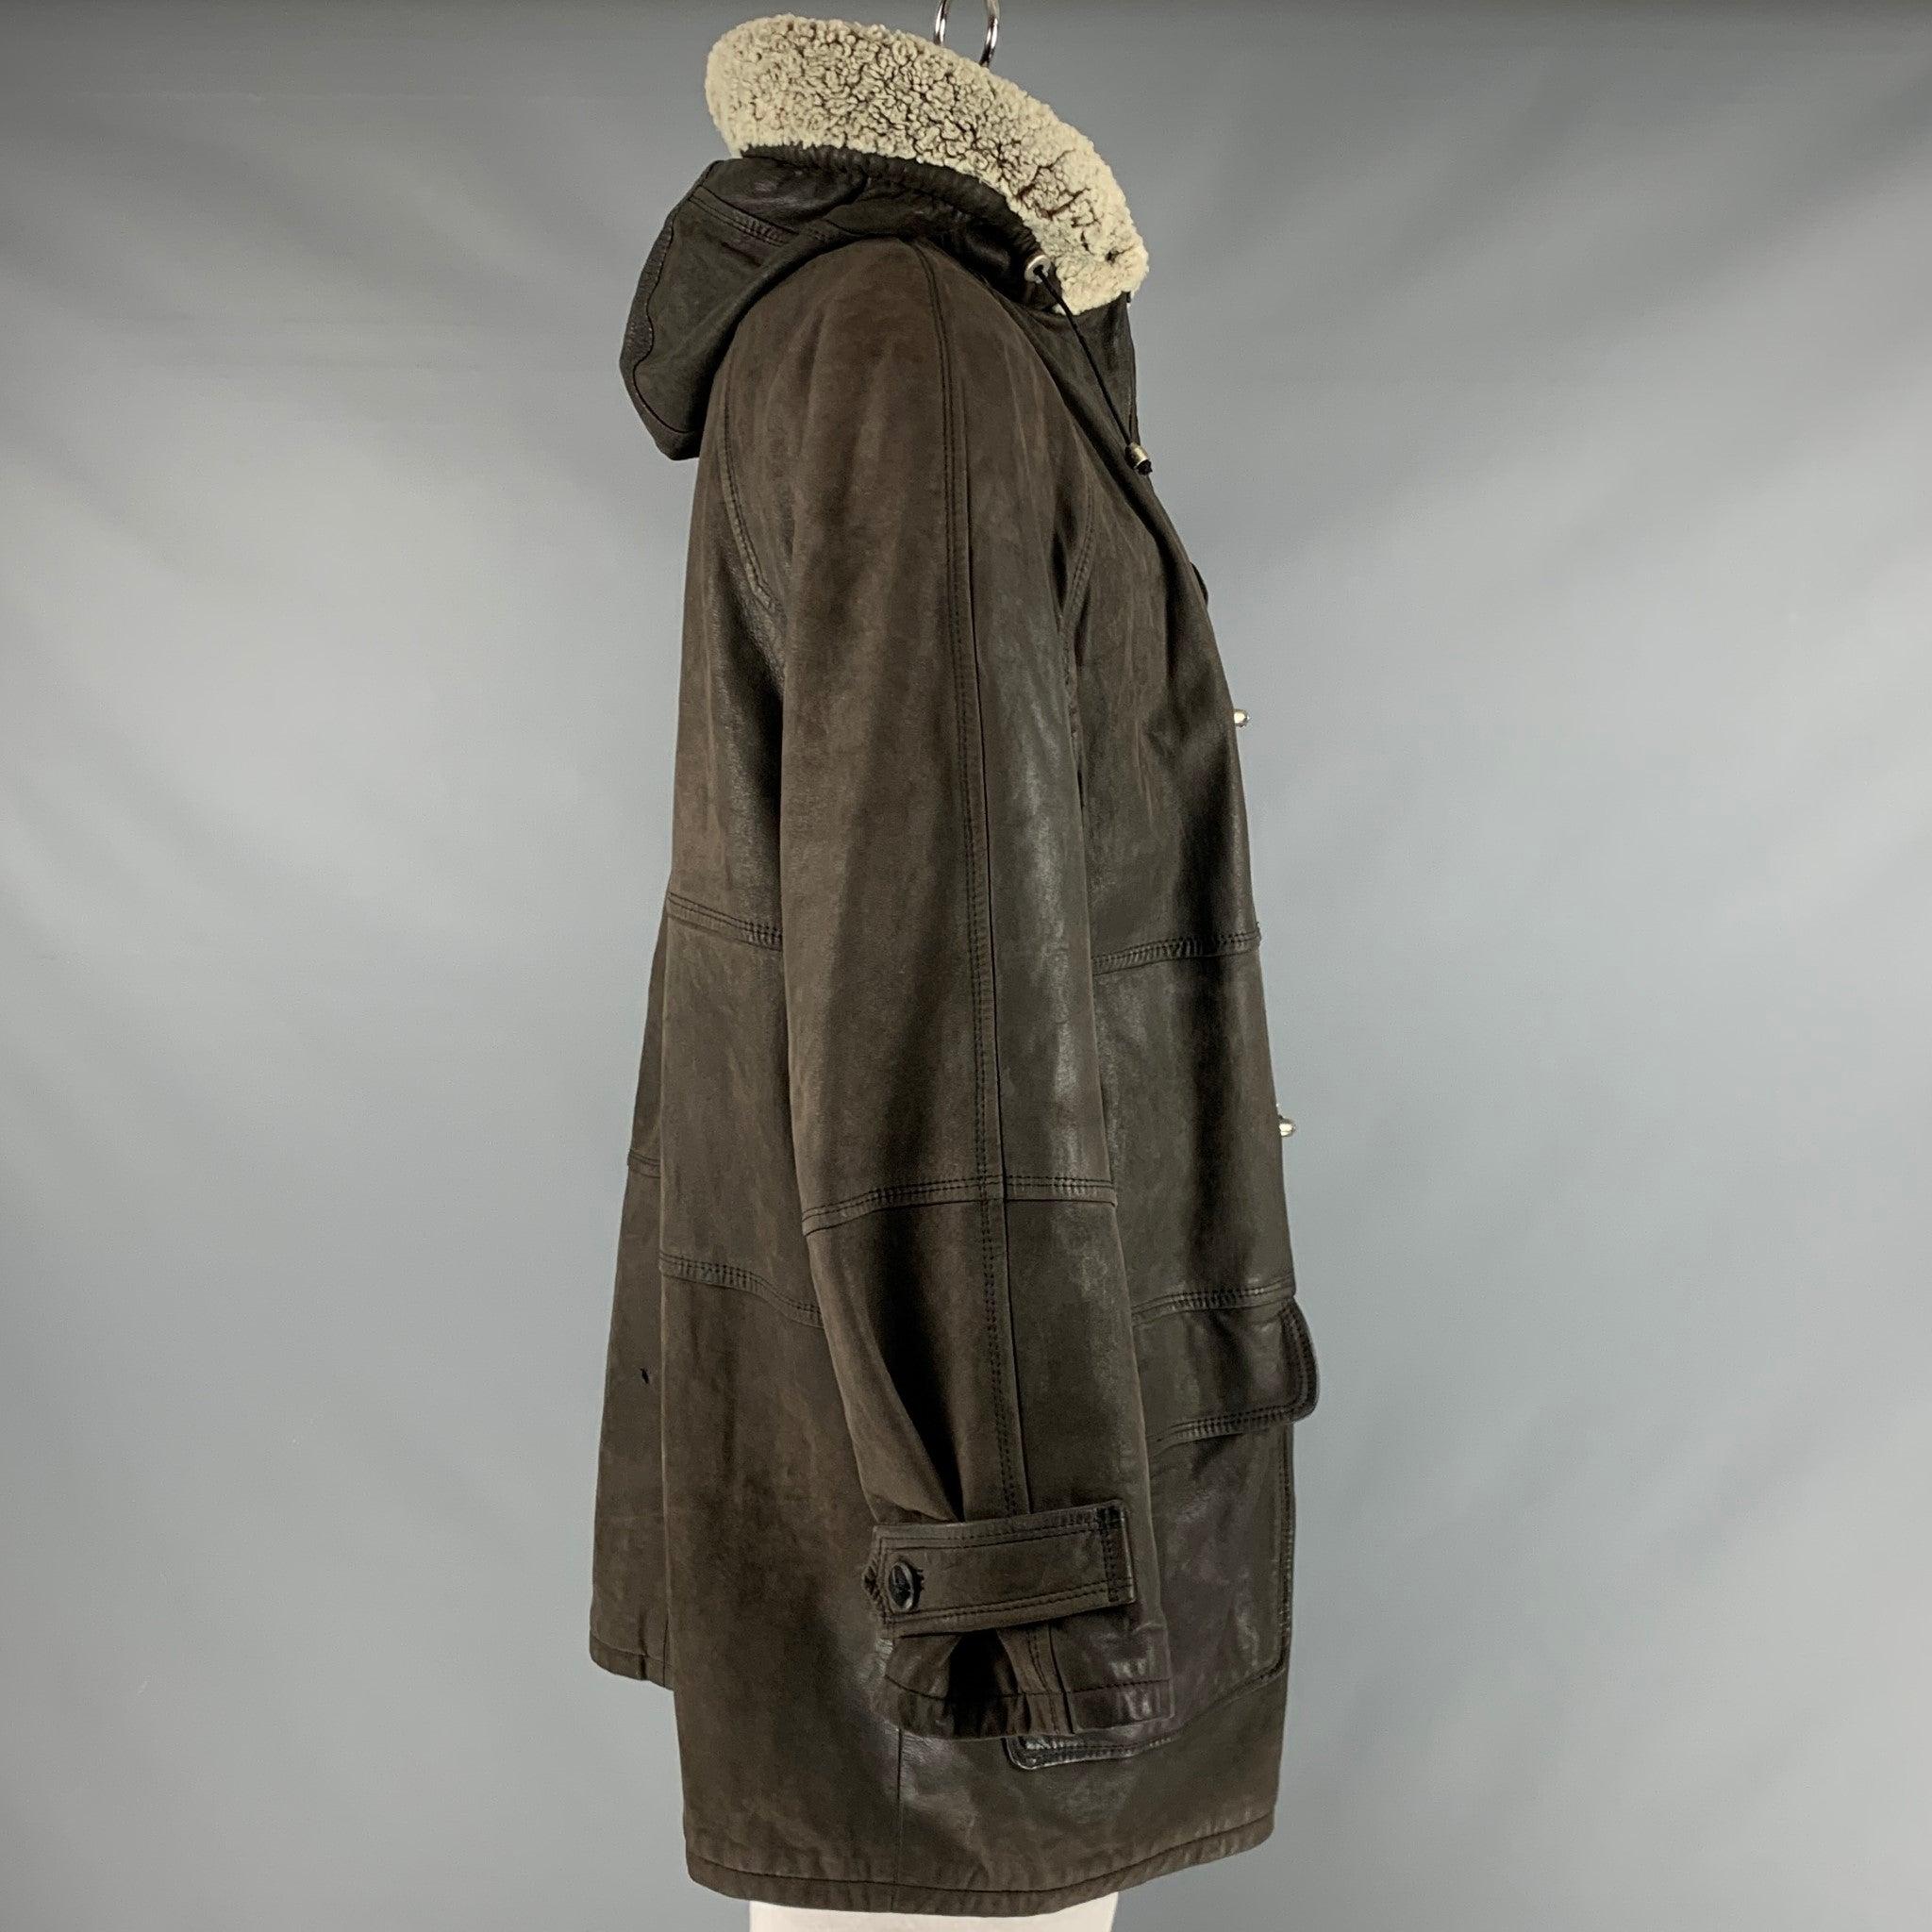 BALLY coat
in a grey olive green leather fabric featuring a nautical style, removable hood with shearling trim, and zip and fishermen's toggle button closure. Made in Italy.Very Good Pre-Owned Condition. Moderate signs of wear. 

Marked:   48